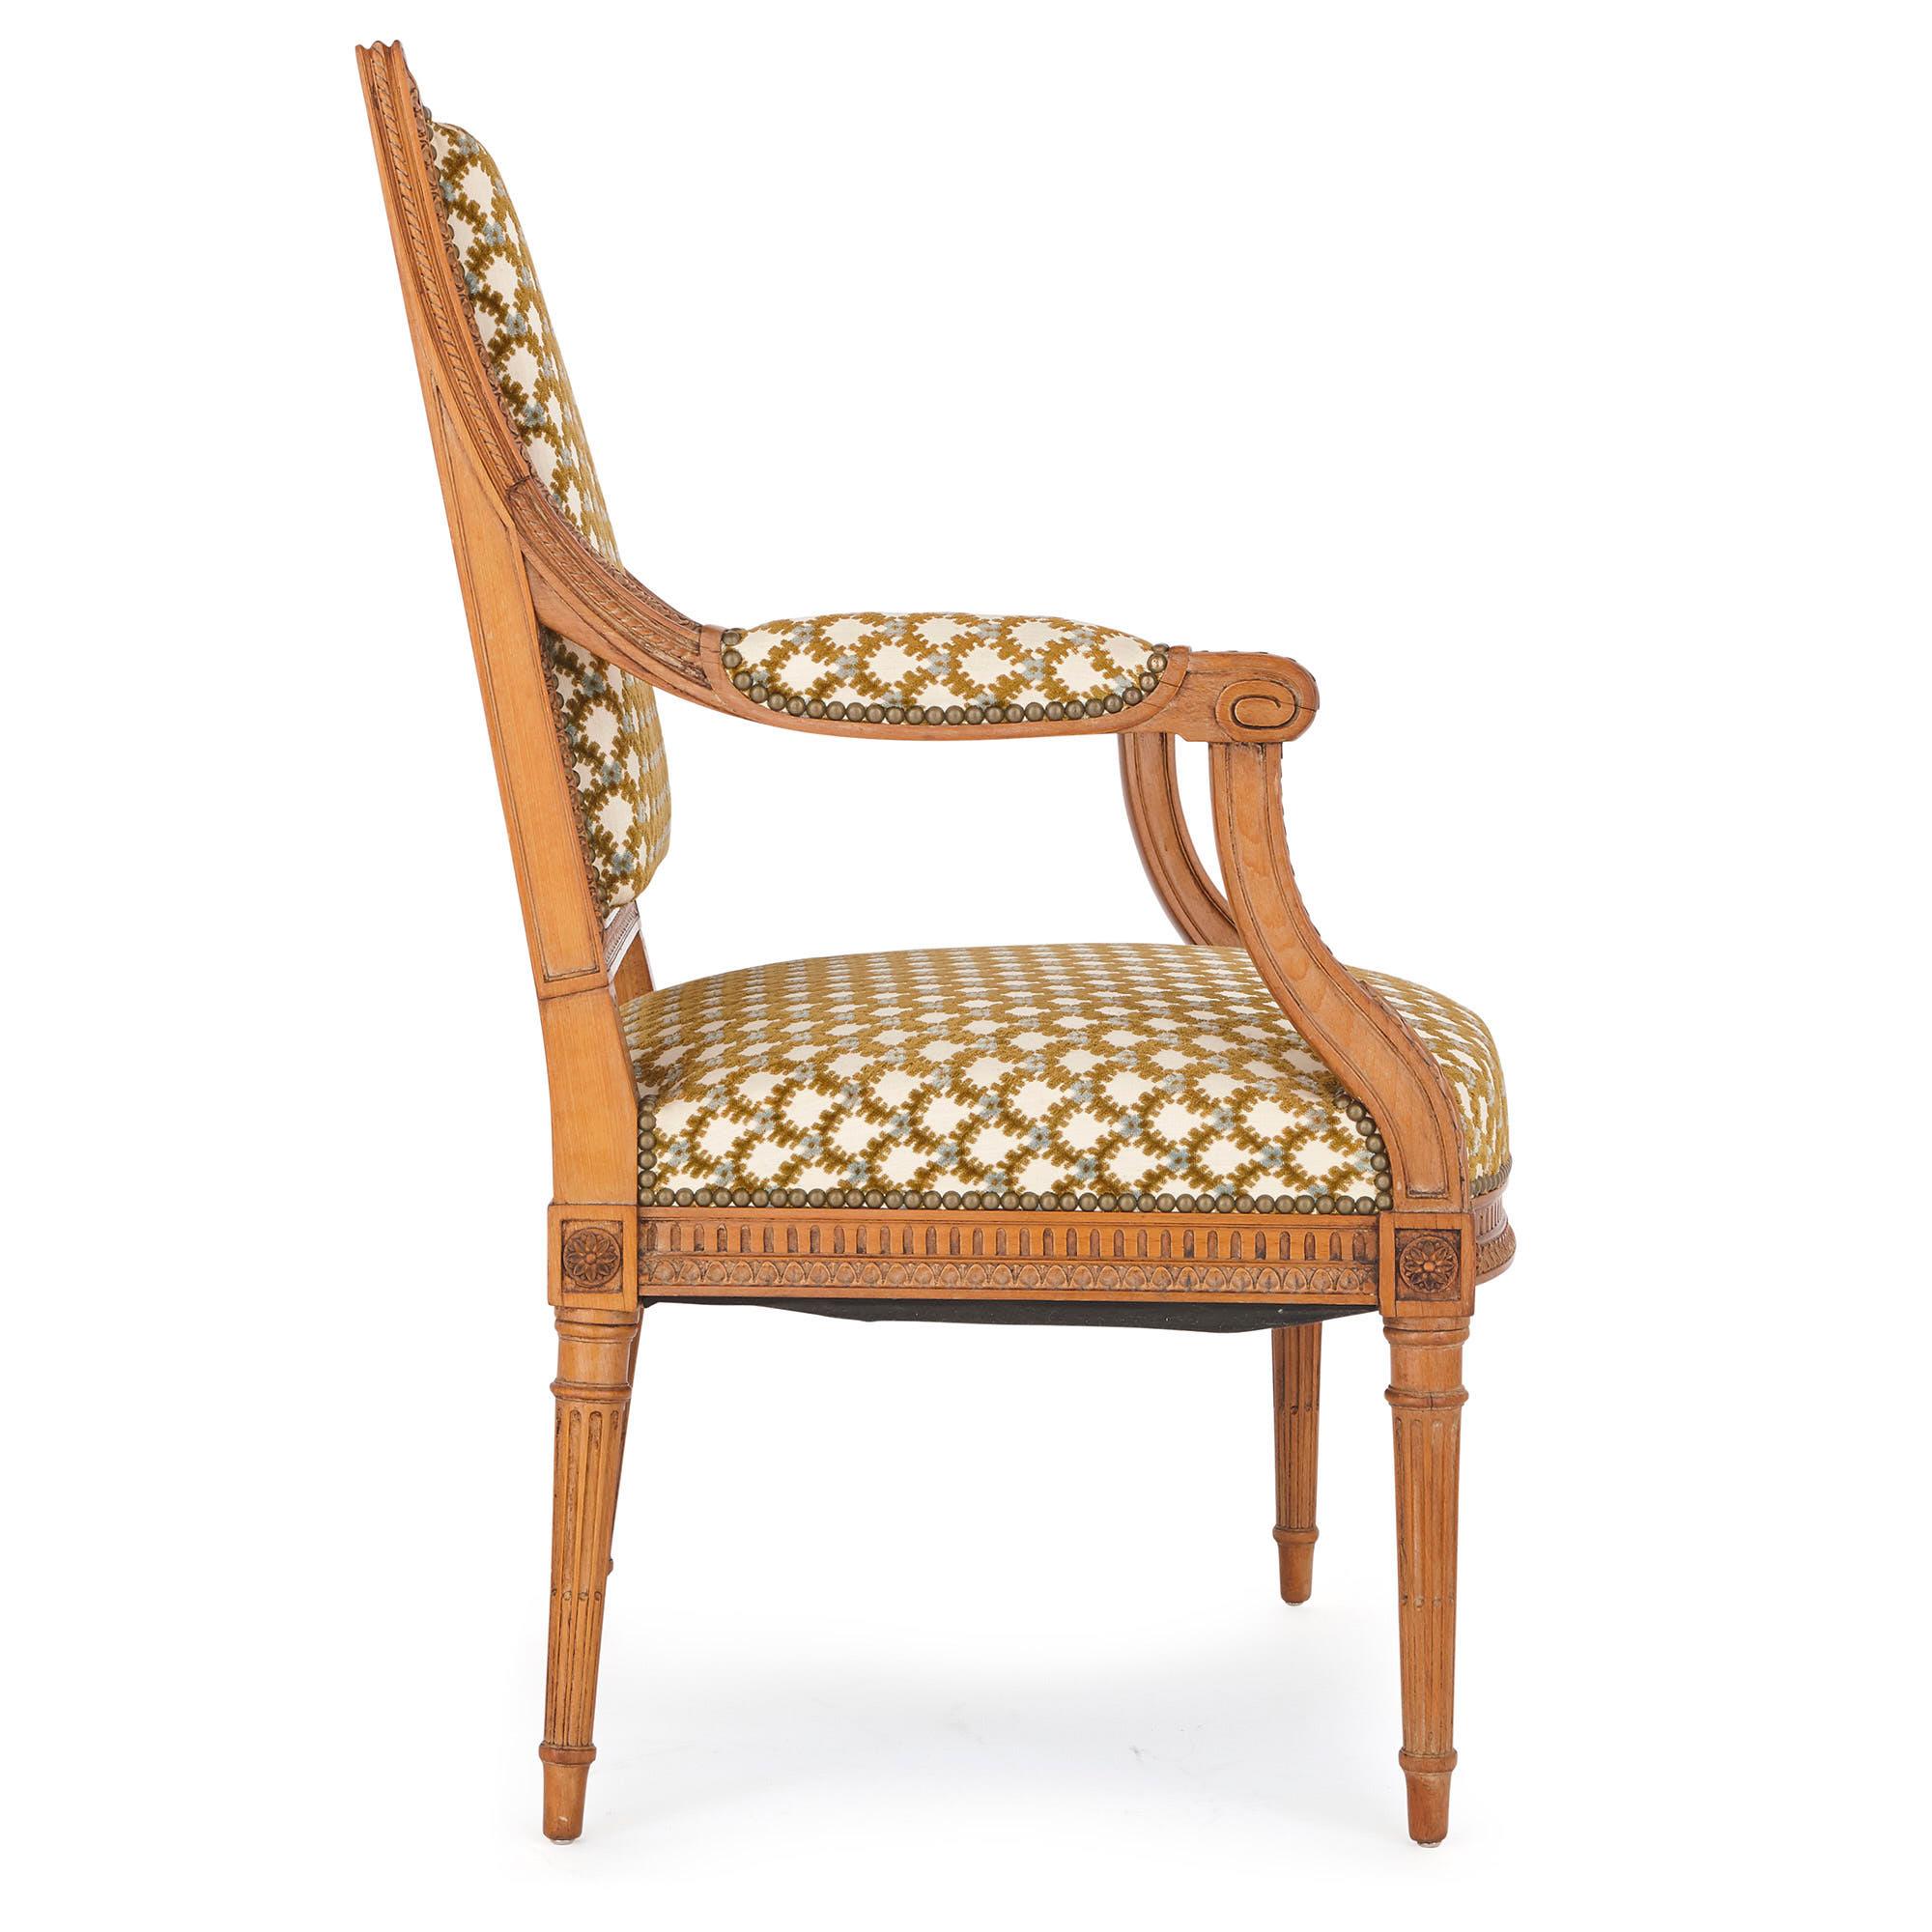 This armchair is a fine piece of workmanship, completed by possibly the most important craftsman of the late 19th and early 20th century, François Linke. The back of the chair is signed ‘F. Linke A Paris’. 

Inspired by the furniture of the Louis